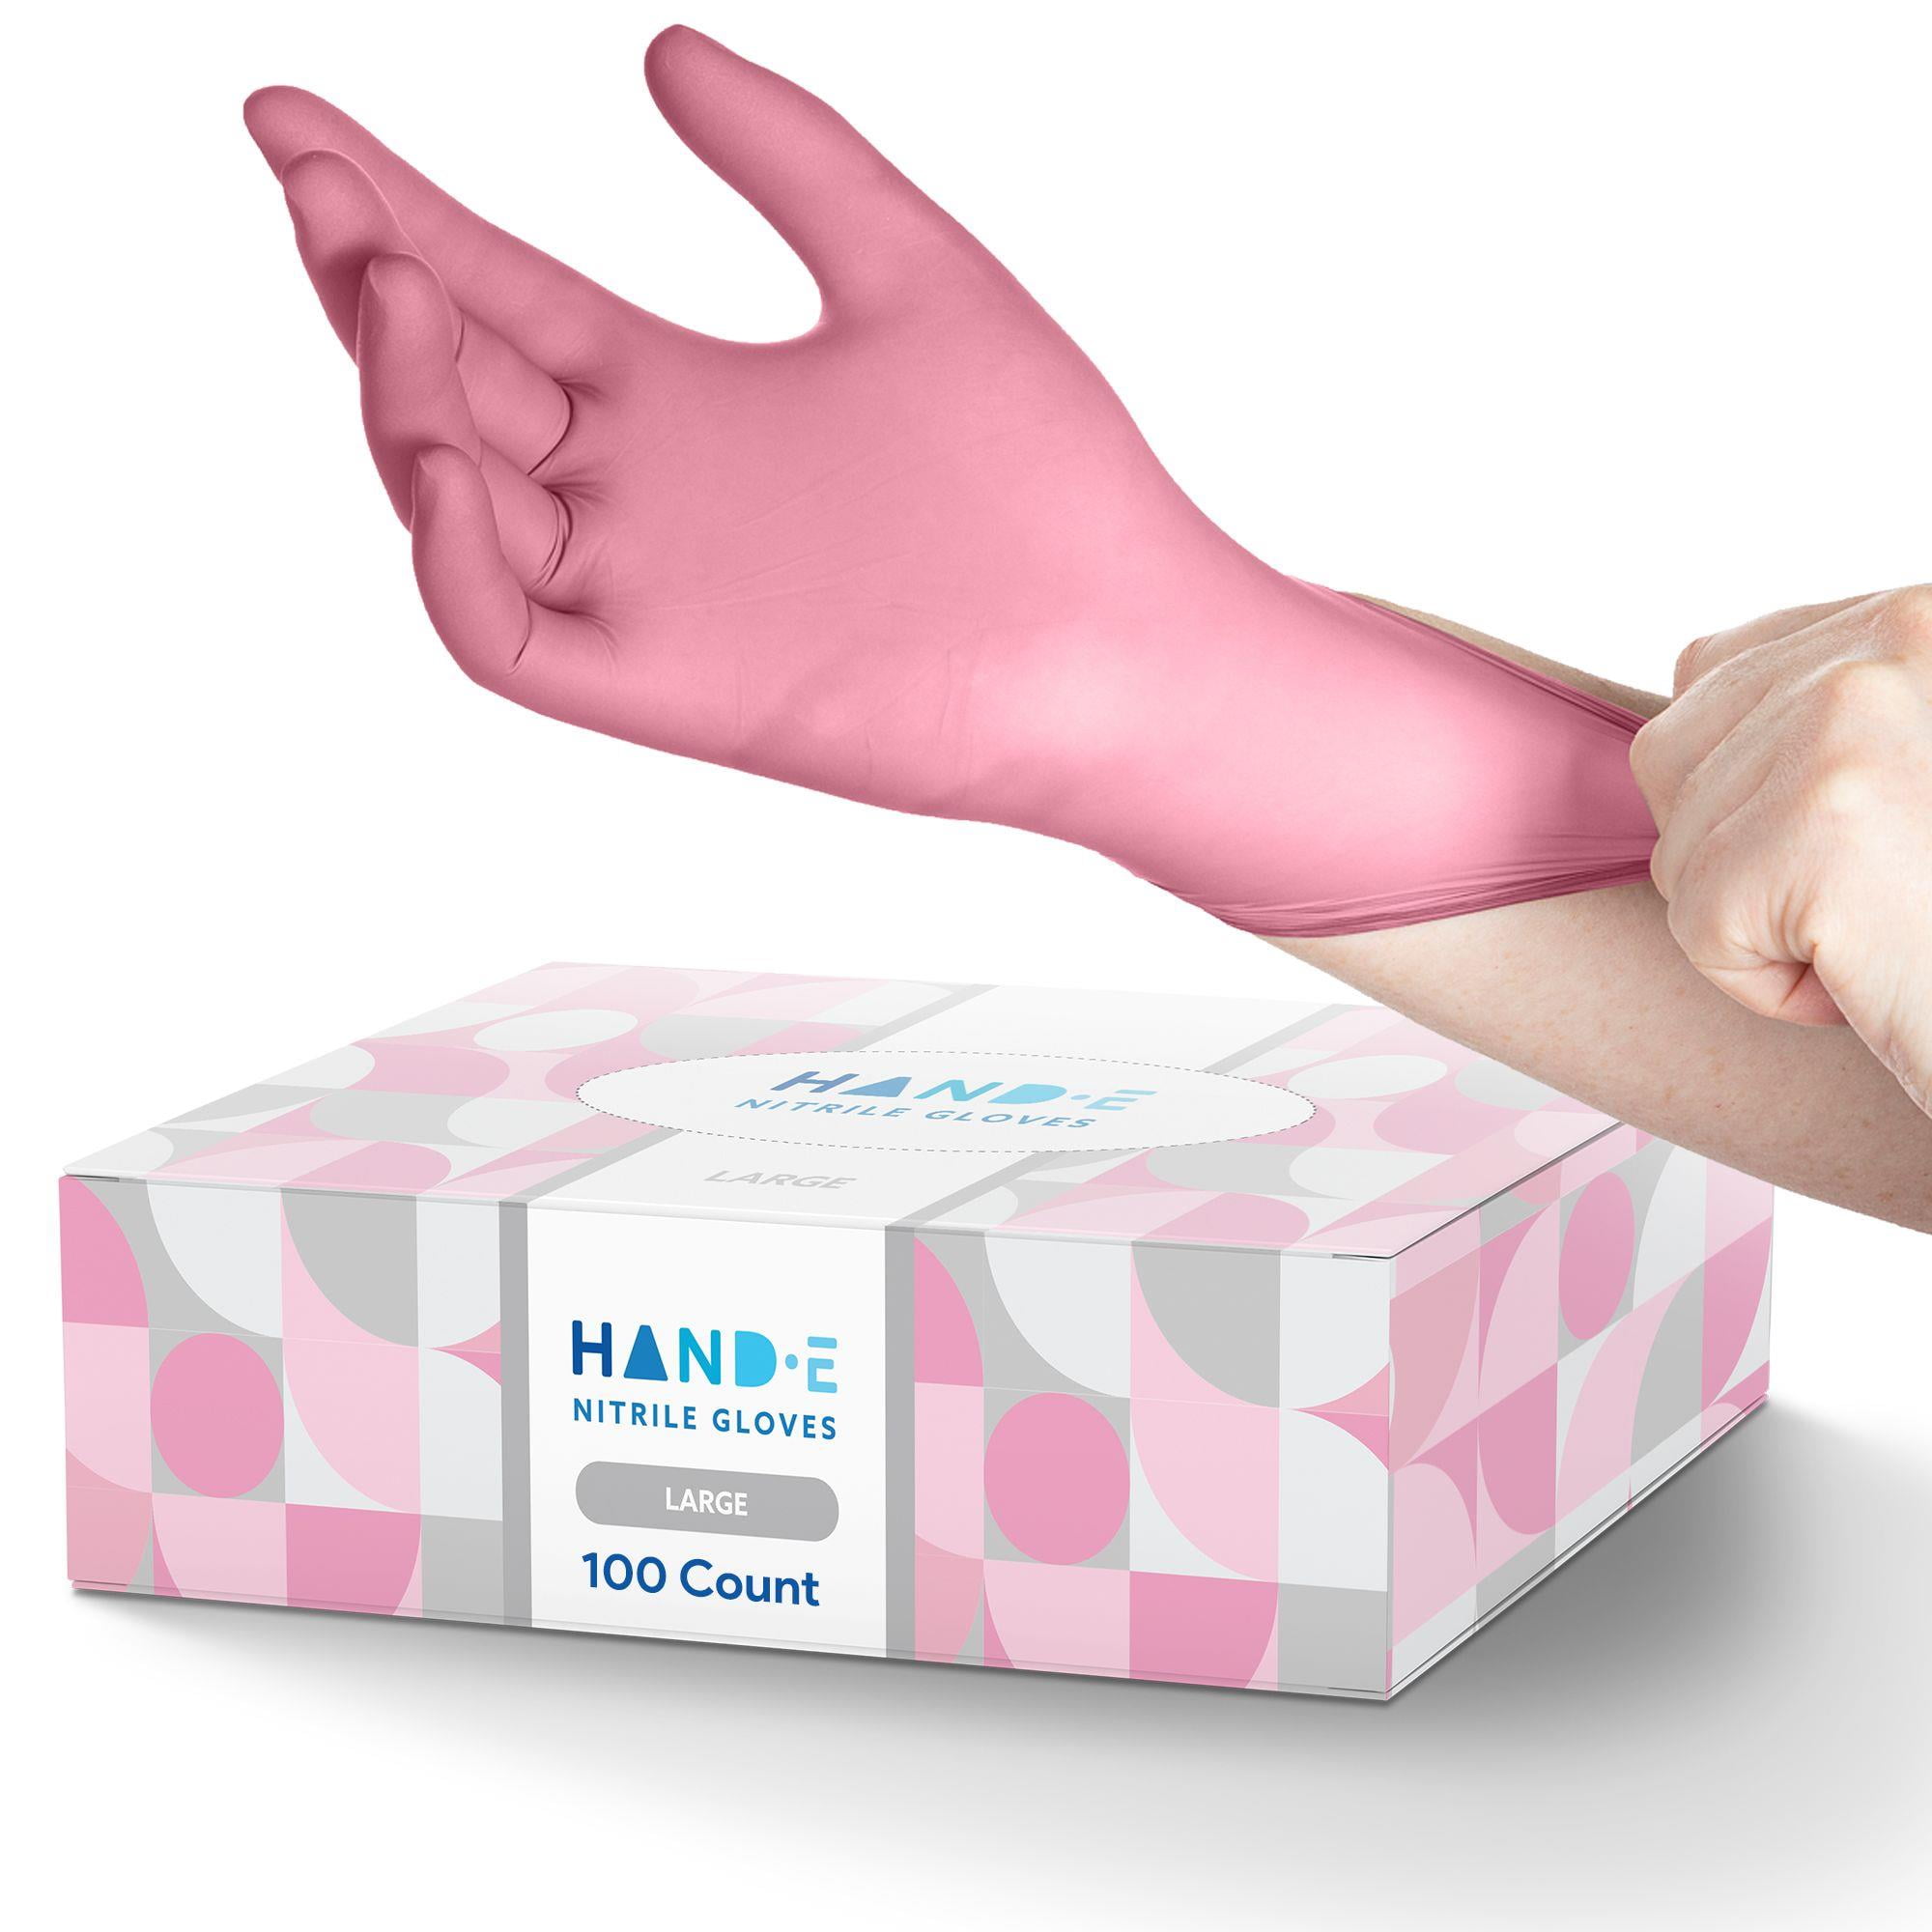 XS Powder Free Nitrile Disposable Gloves Ideal for Kids PINK WHITE 10 gloves 